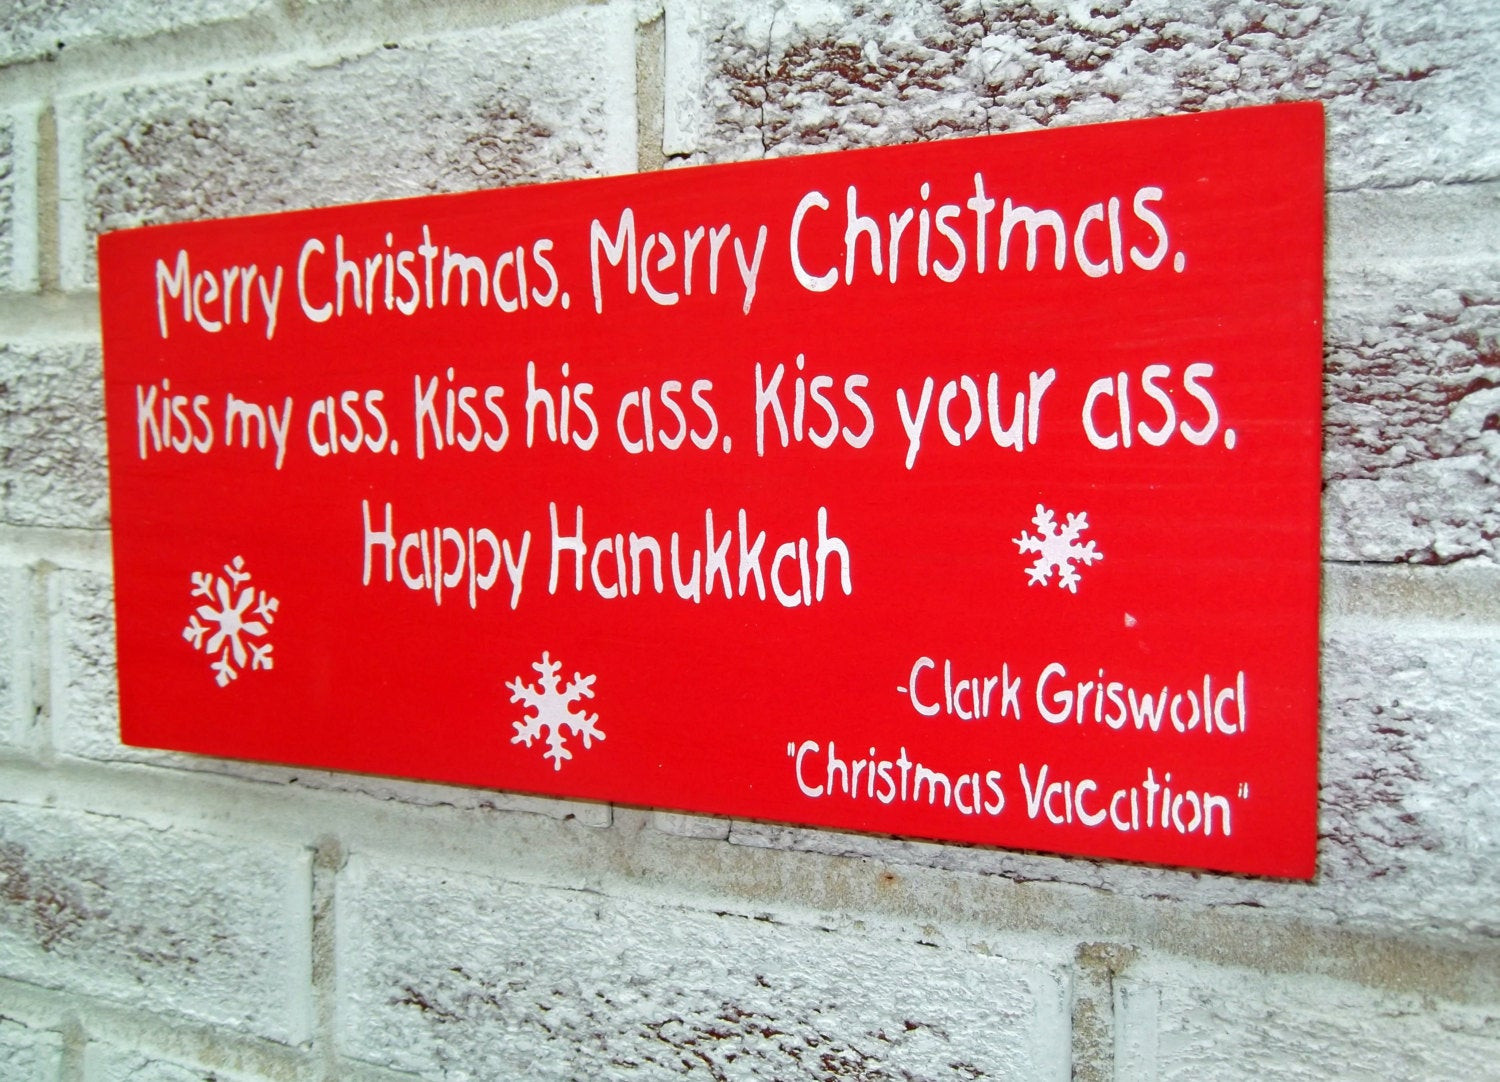 Griswolds Christmas Vacation Quotes
 Items similar to Clark Griswold Christmas Vacation quote